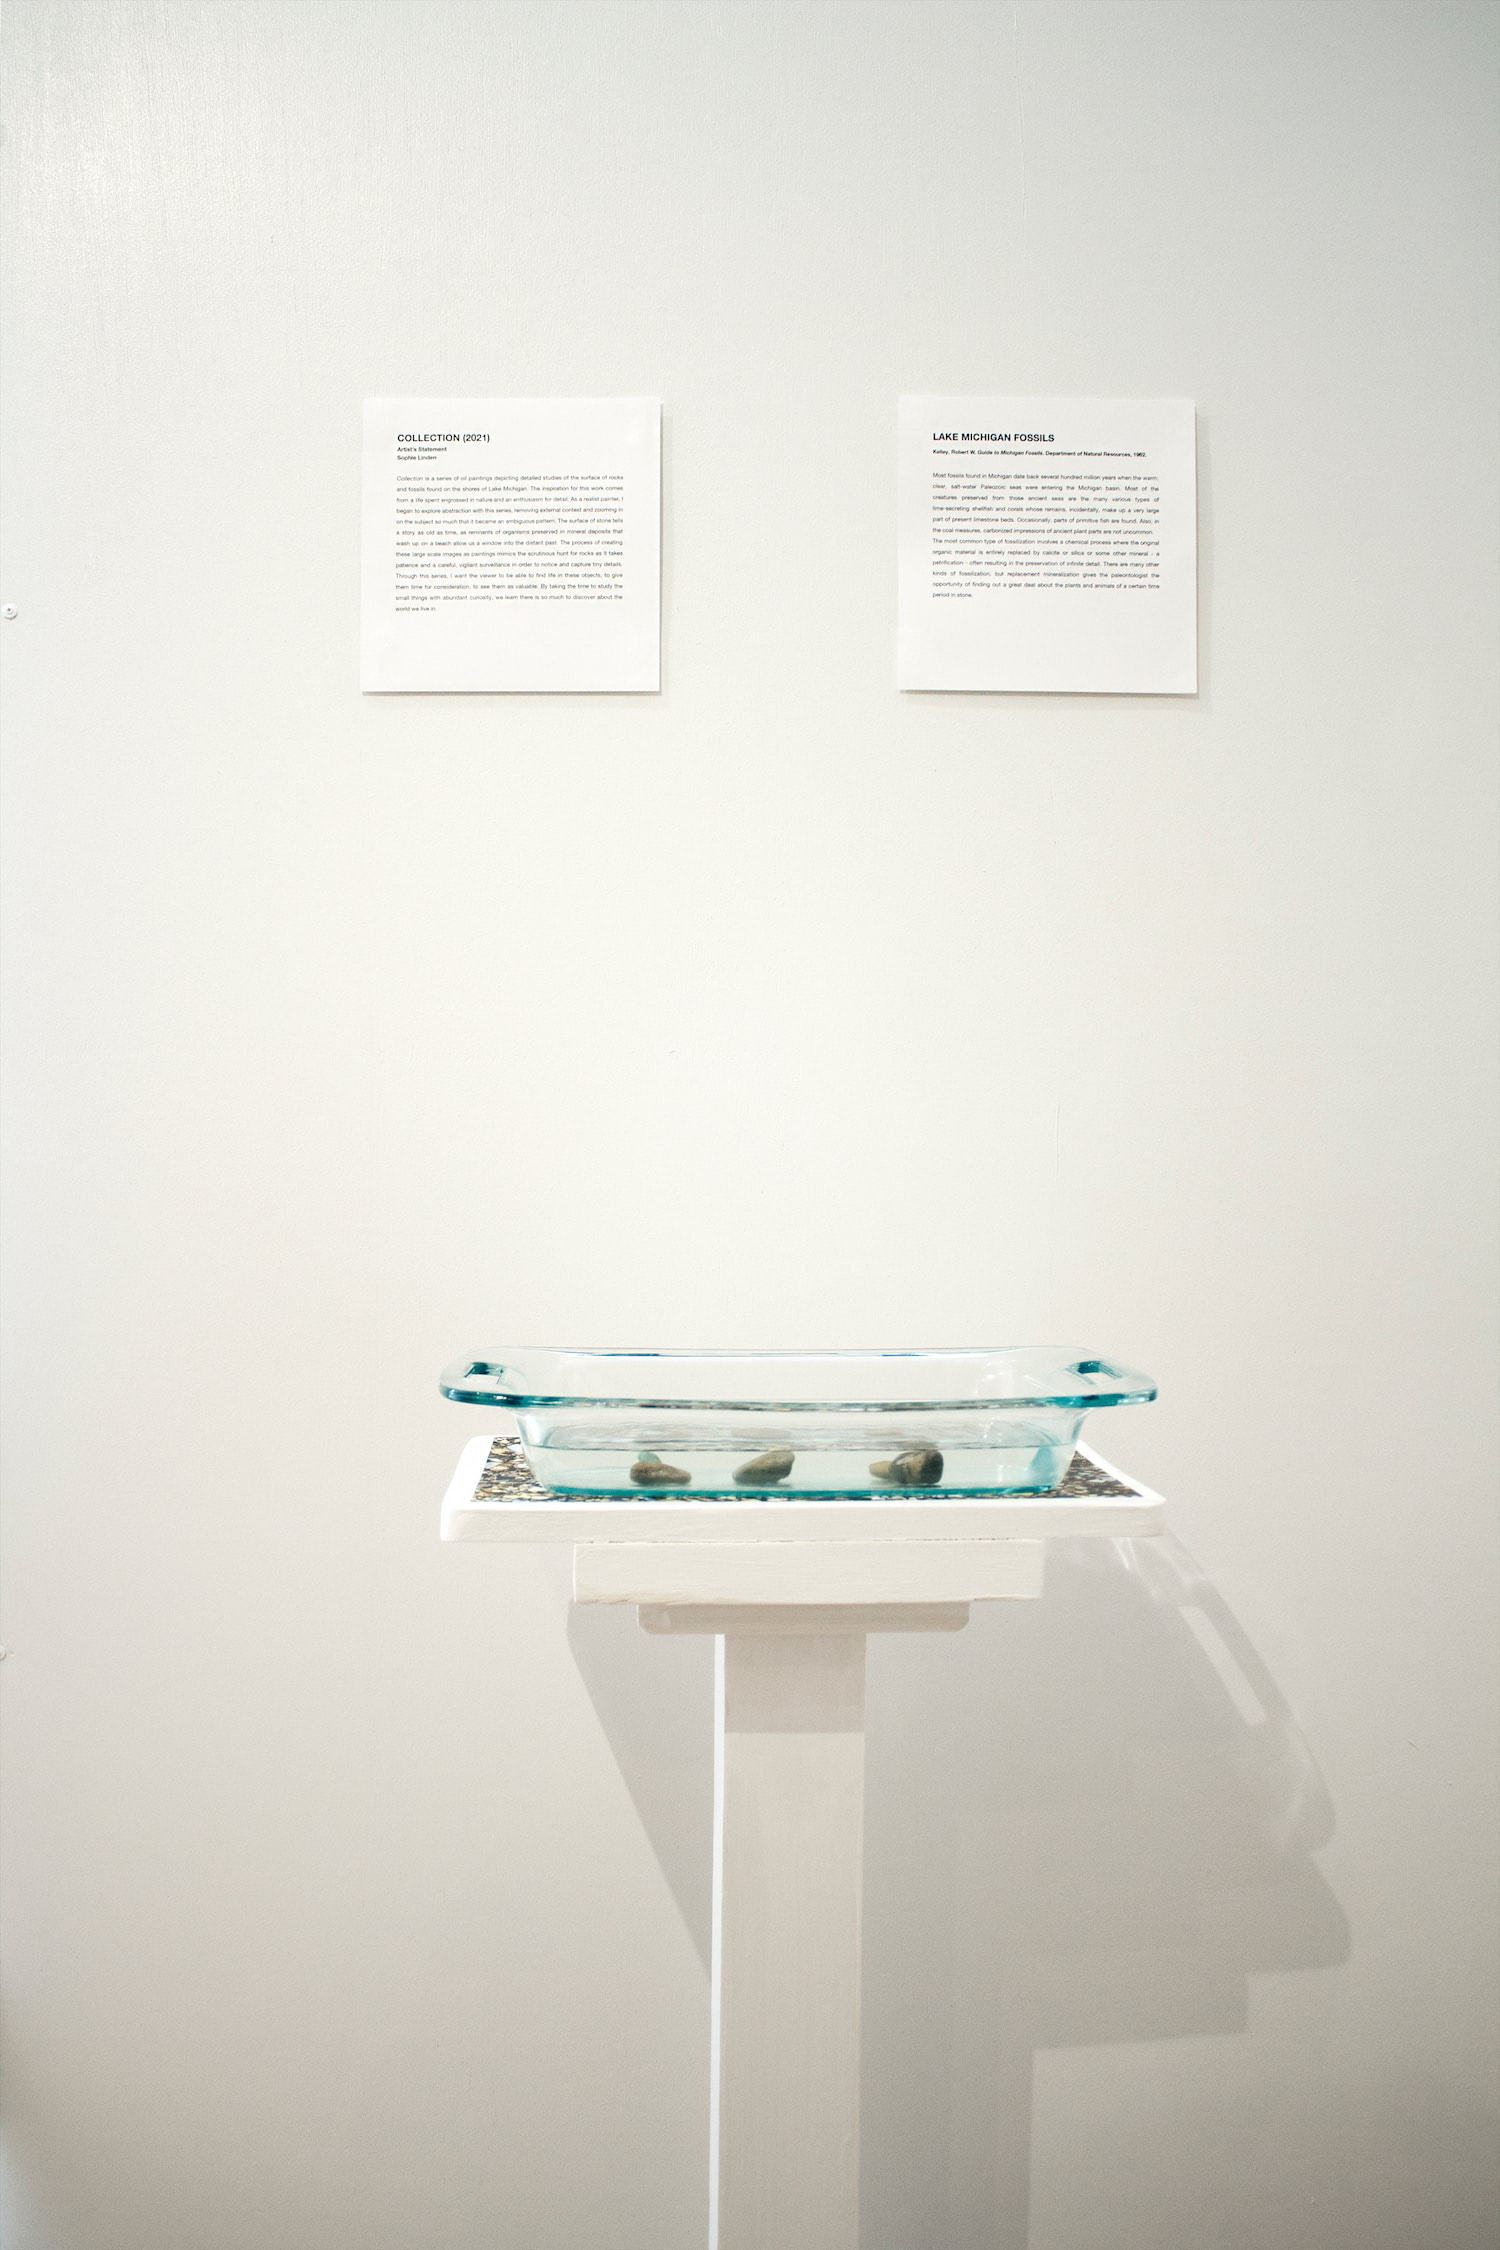 A white podium with an image of rocks at the original beach site adhered to the top, supporting a glass tray filled with water and the five rocks featured in the paintings. The podium stands directly beneath the artist statement and the scientific context of Lake Michigan Fossils.